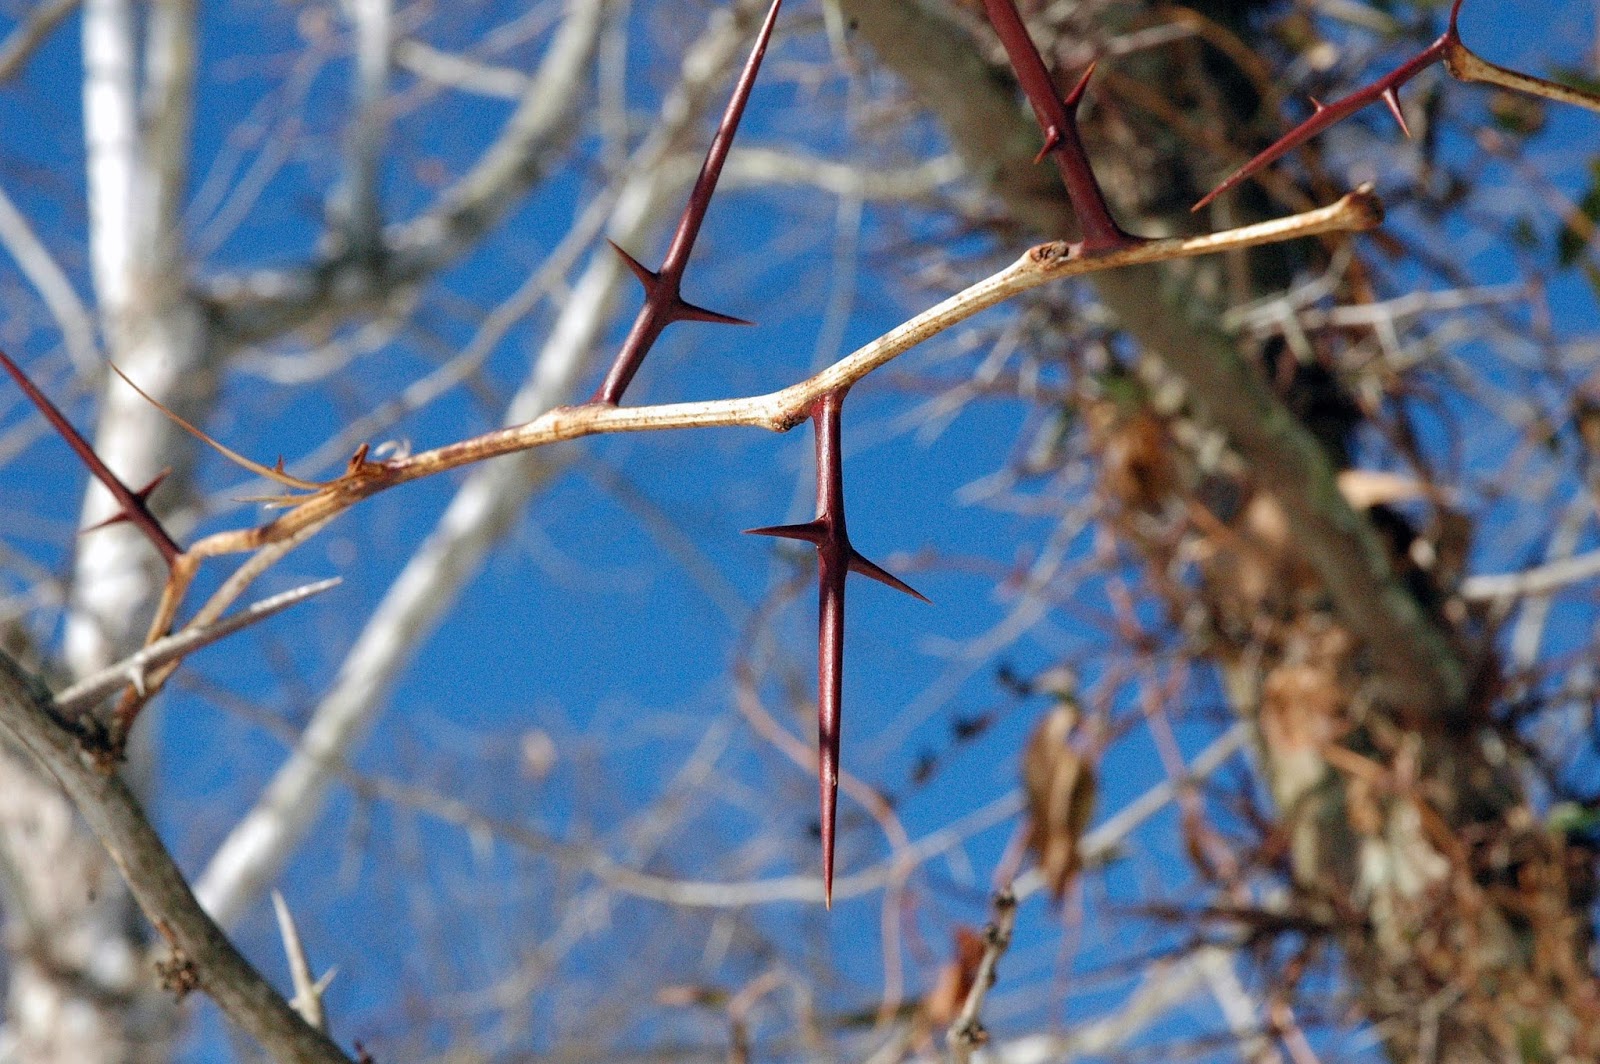 What types of trees have thorns?